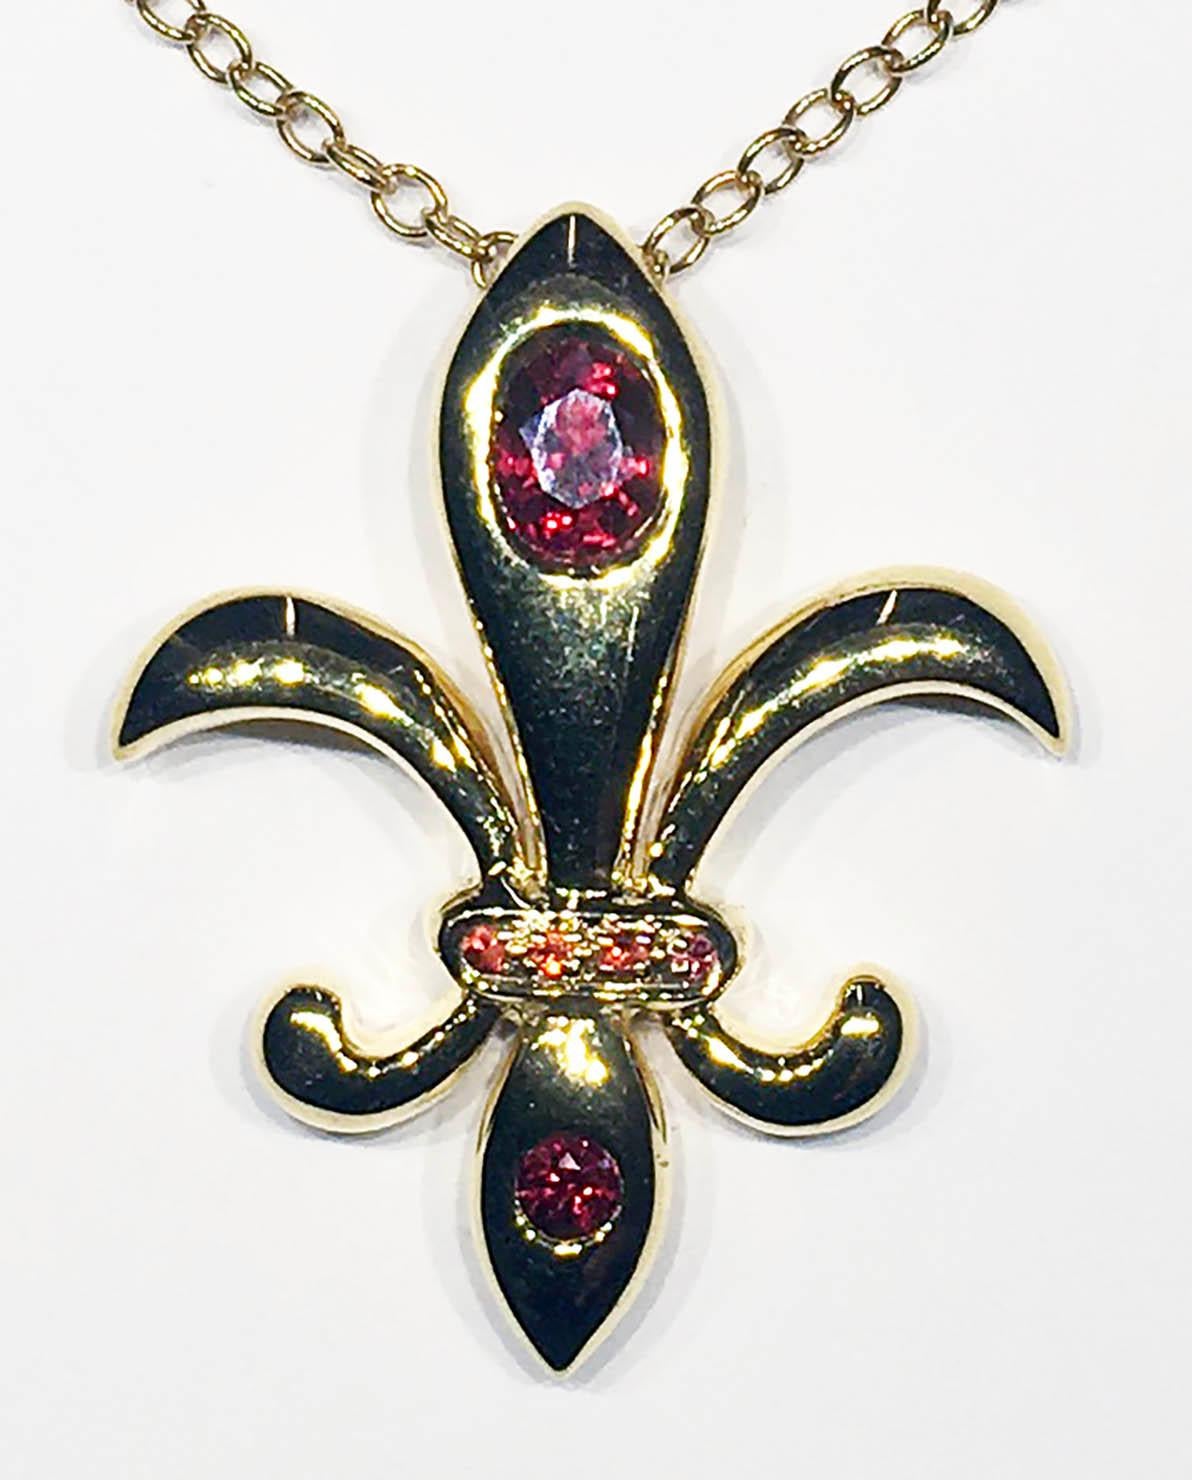 A 14kt Yellow Gold Fleur De Lis Pendant with 6 Red Sapphires.
These Sapphires have been heat treated in Chanthaburi Thailand with Beryllium to achieve this vivid Red color. Originally the Sapphires were mined in East Africa and were a yellowish